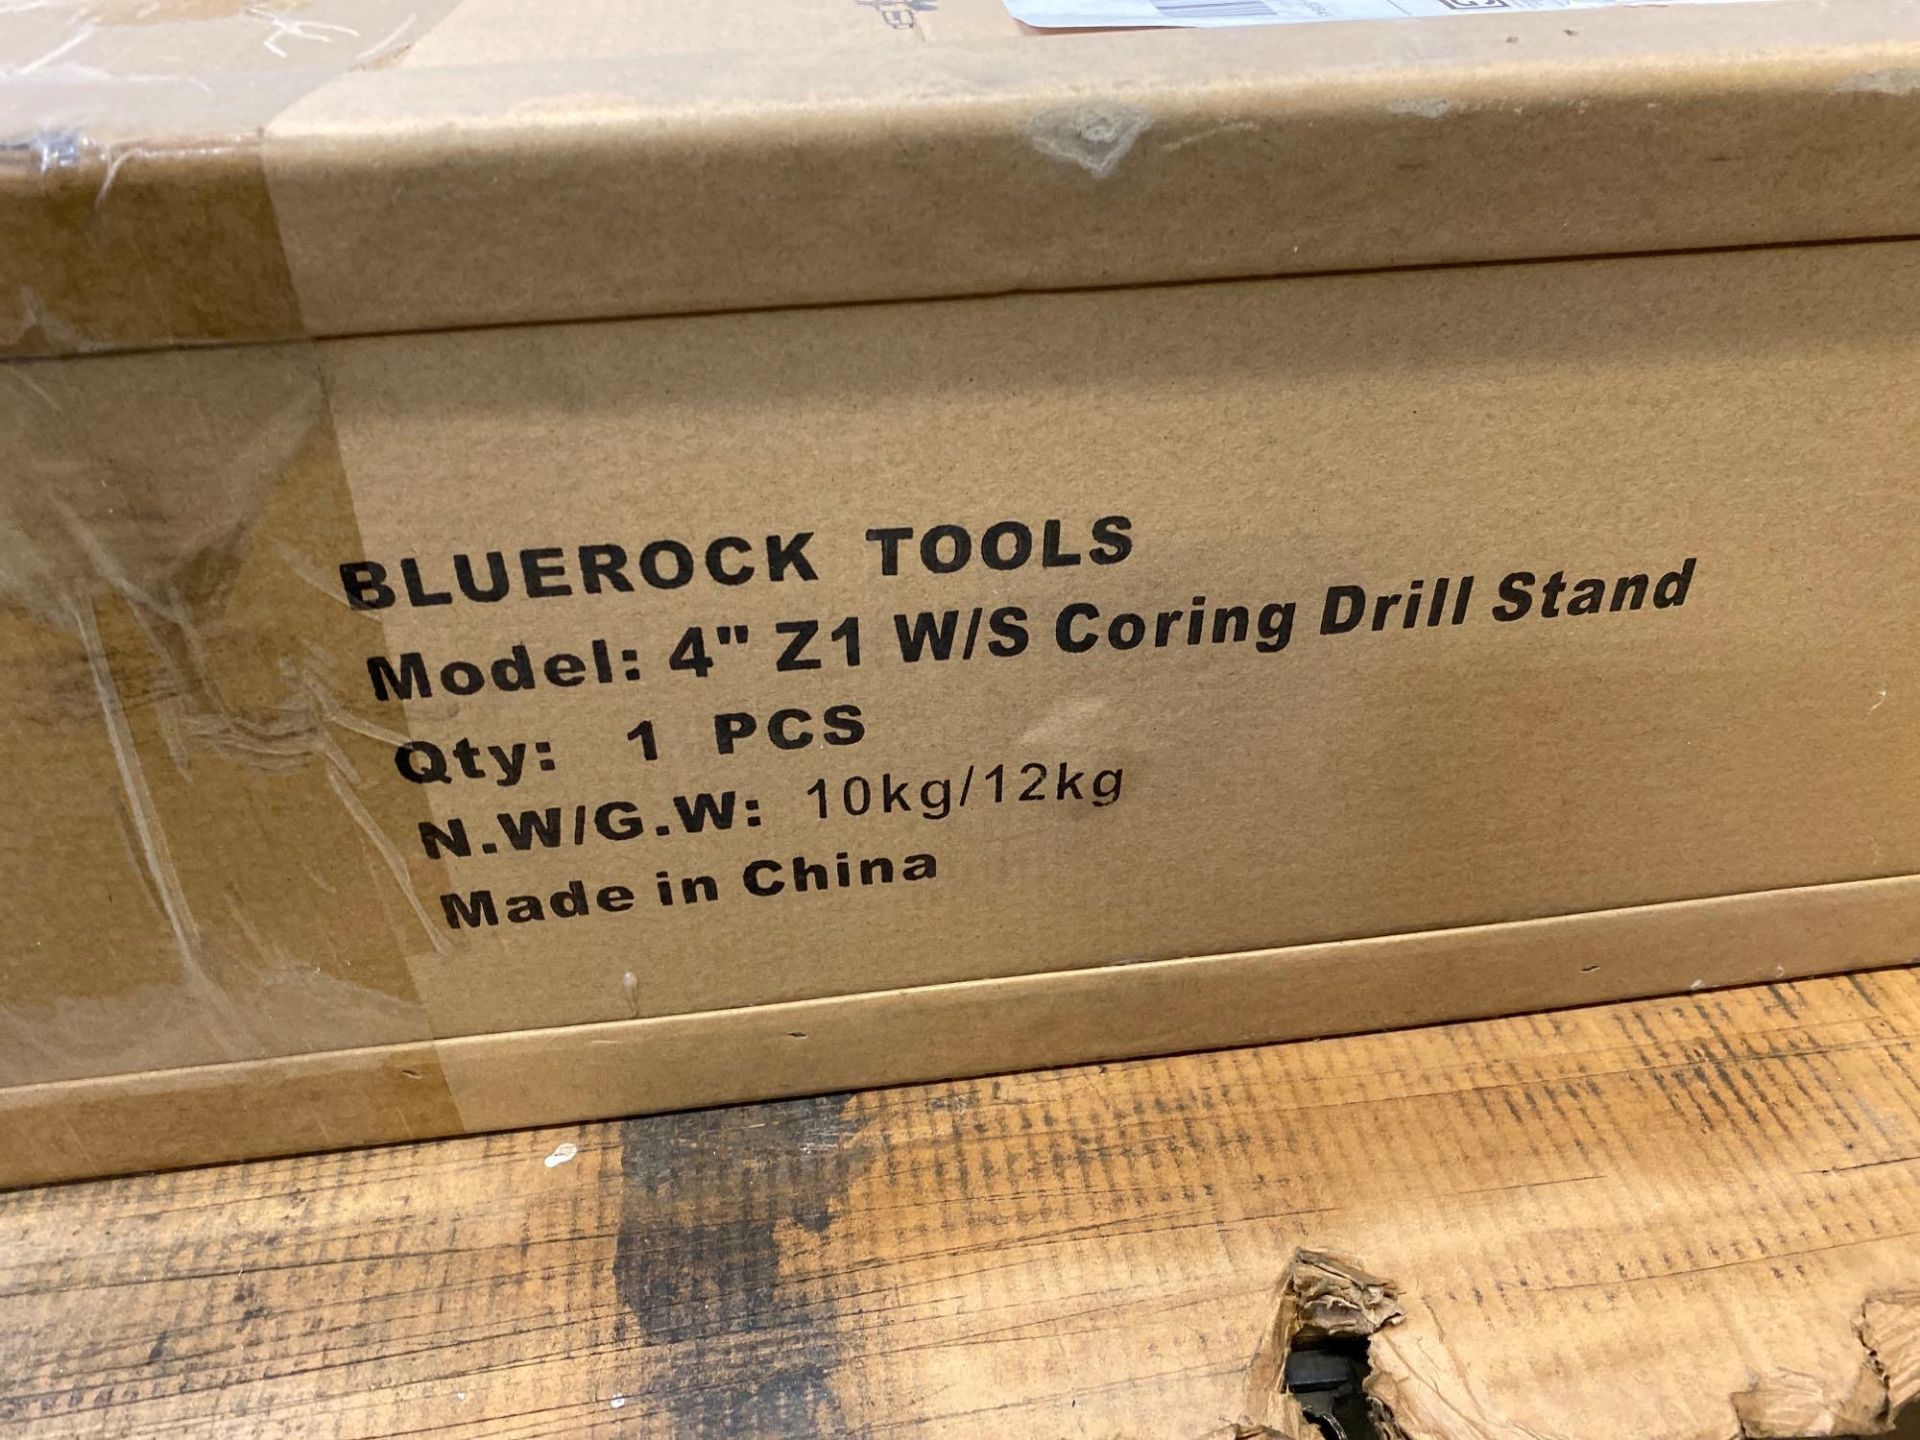 Lot of (2) NEW IN BOX BLUEROCK Mod 4" Z1 W/S - Coring Drill Stand Only - Image 2 of 3